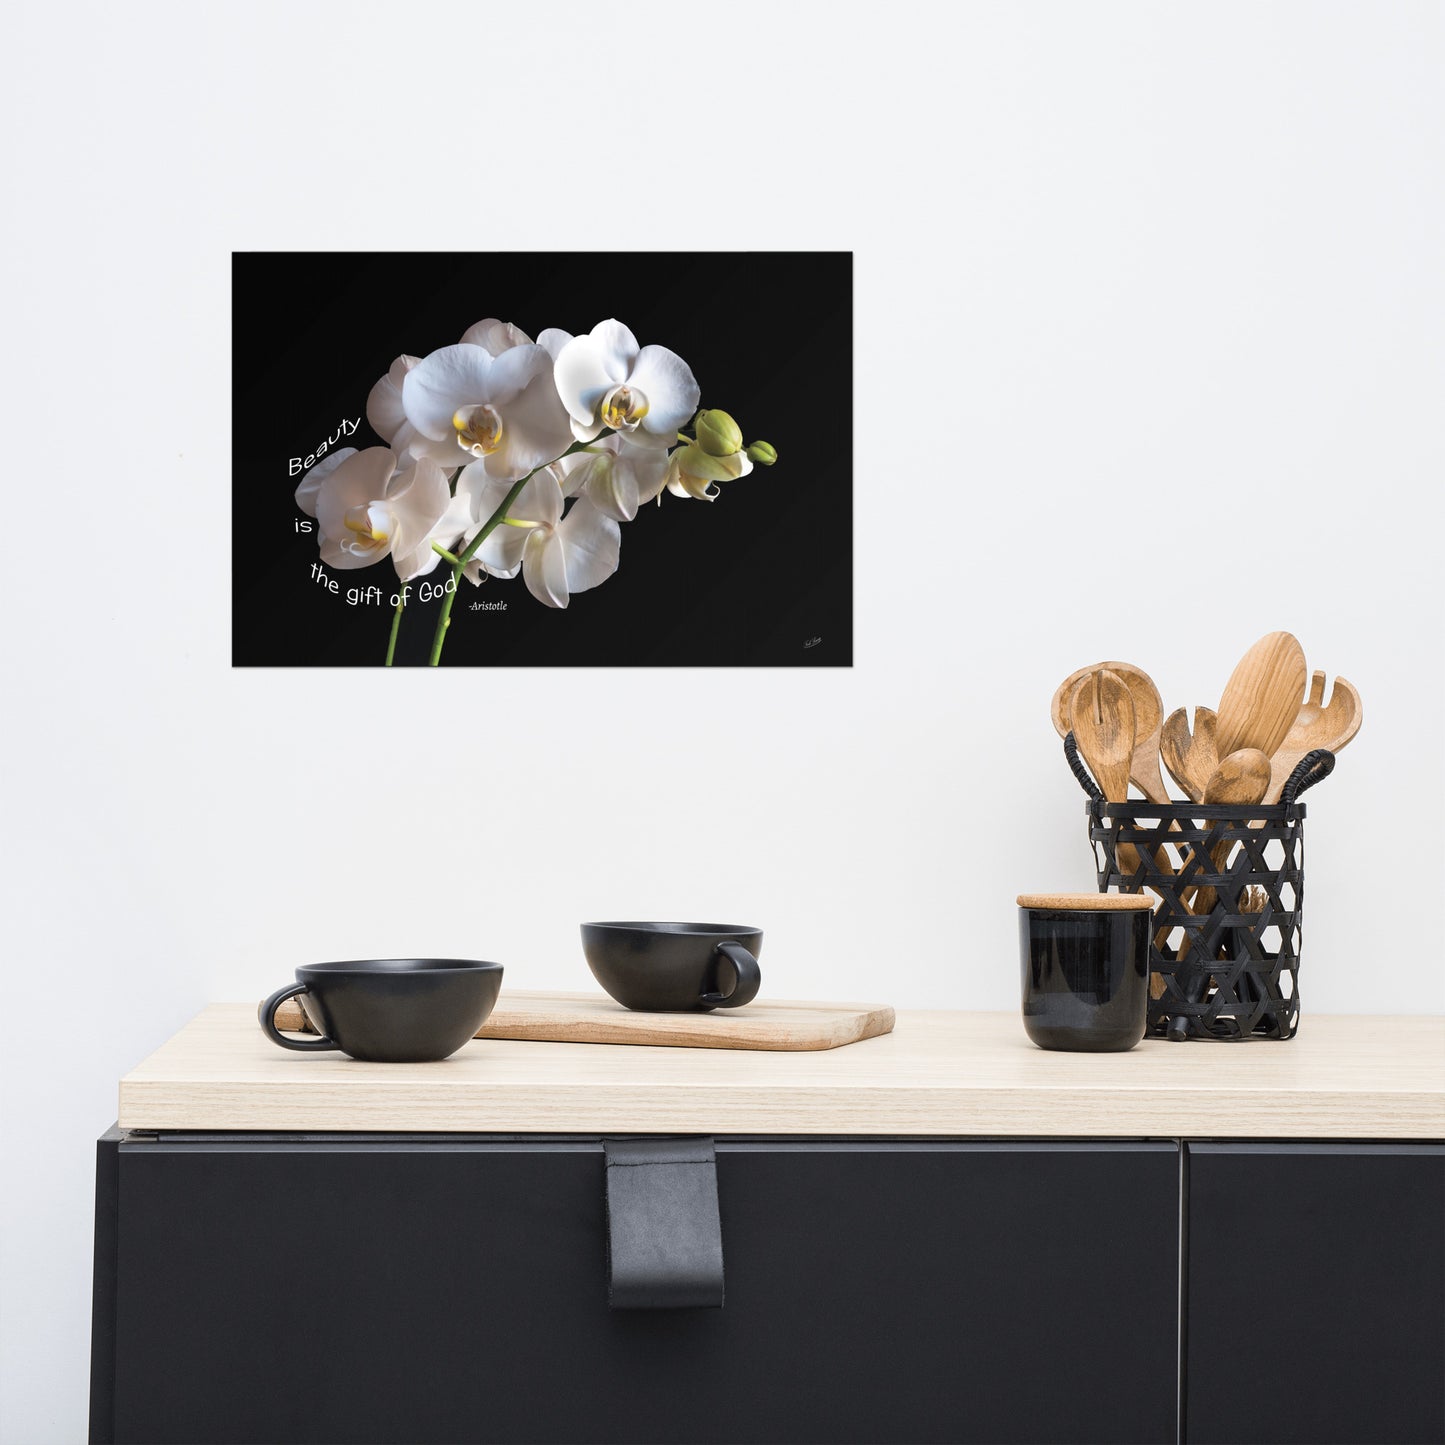 White Orchid Print Aristotle Quote - "Beauty is the gift of God" - Inspirational spiritual Wall Art. Dramatic Black Background Floral art.